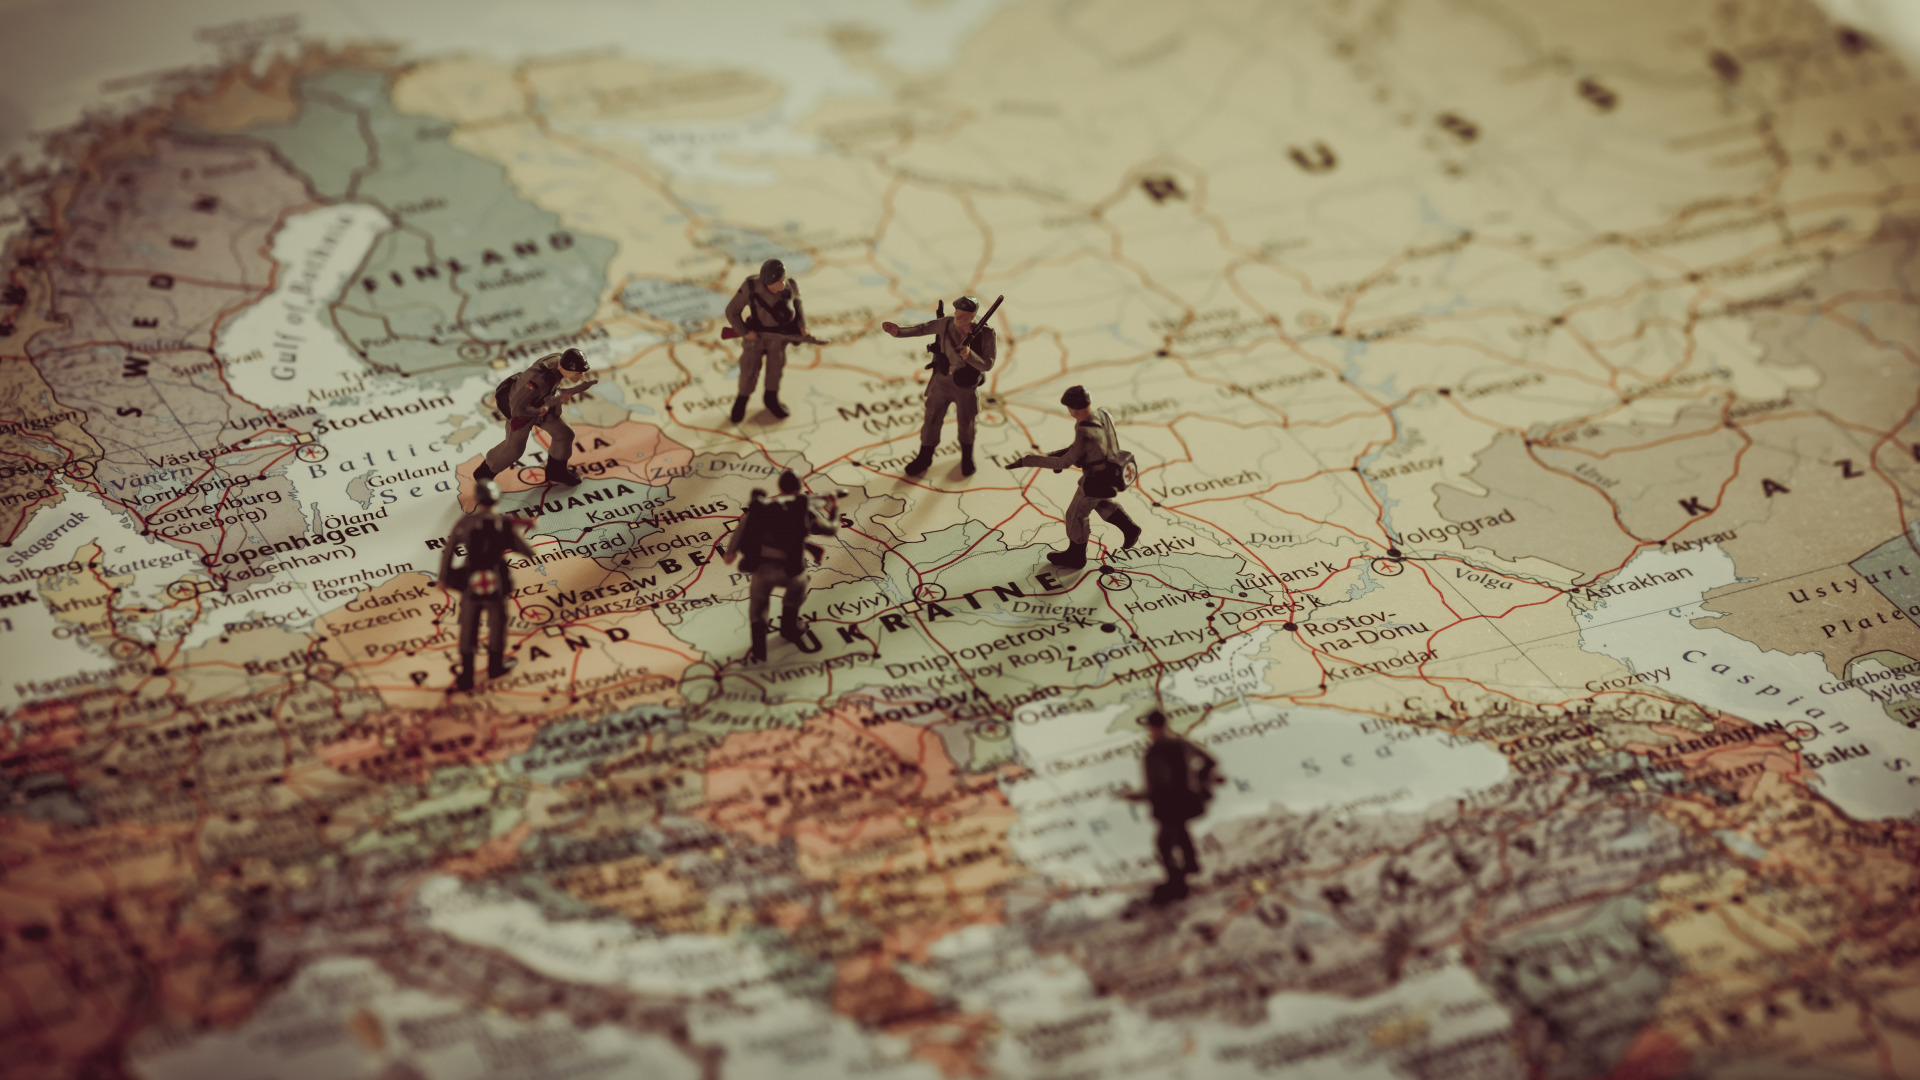 Globes Continents Map Countries Miniatures Soldier Figurines Toys Depth Of Field Closeup Europe Pola 1920x1080